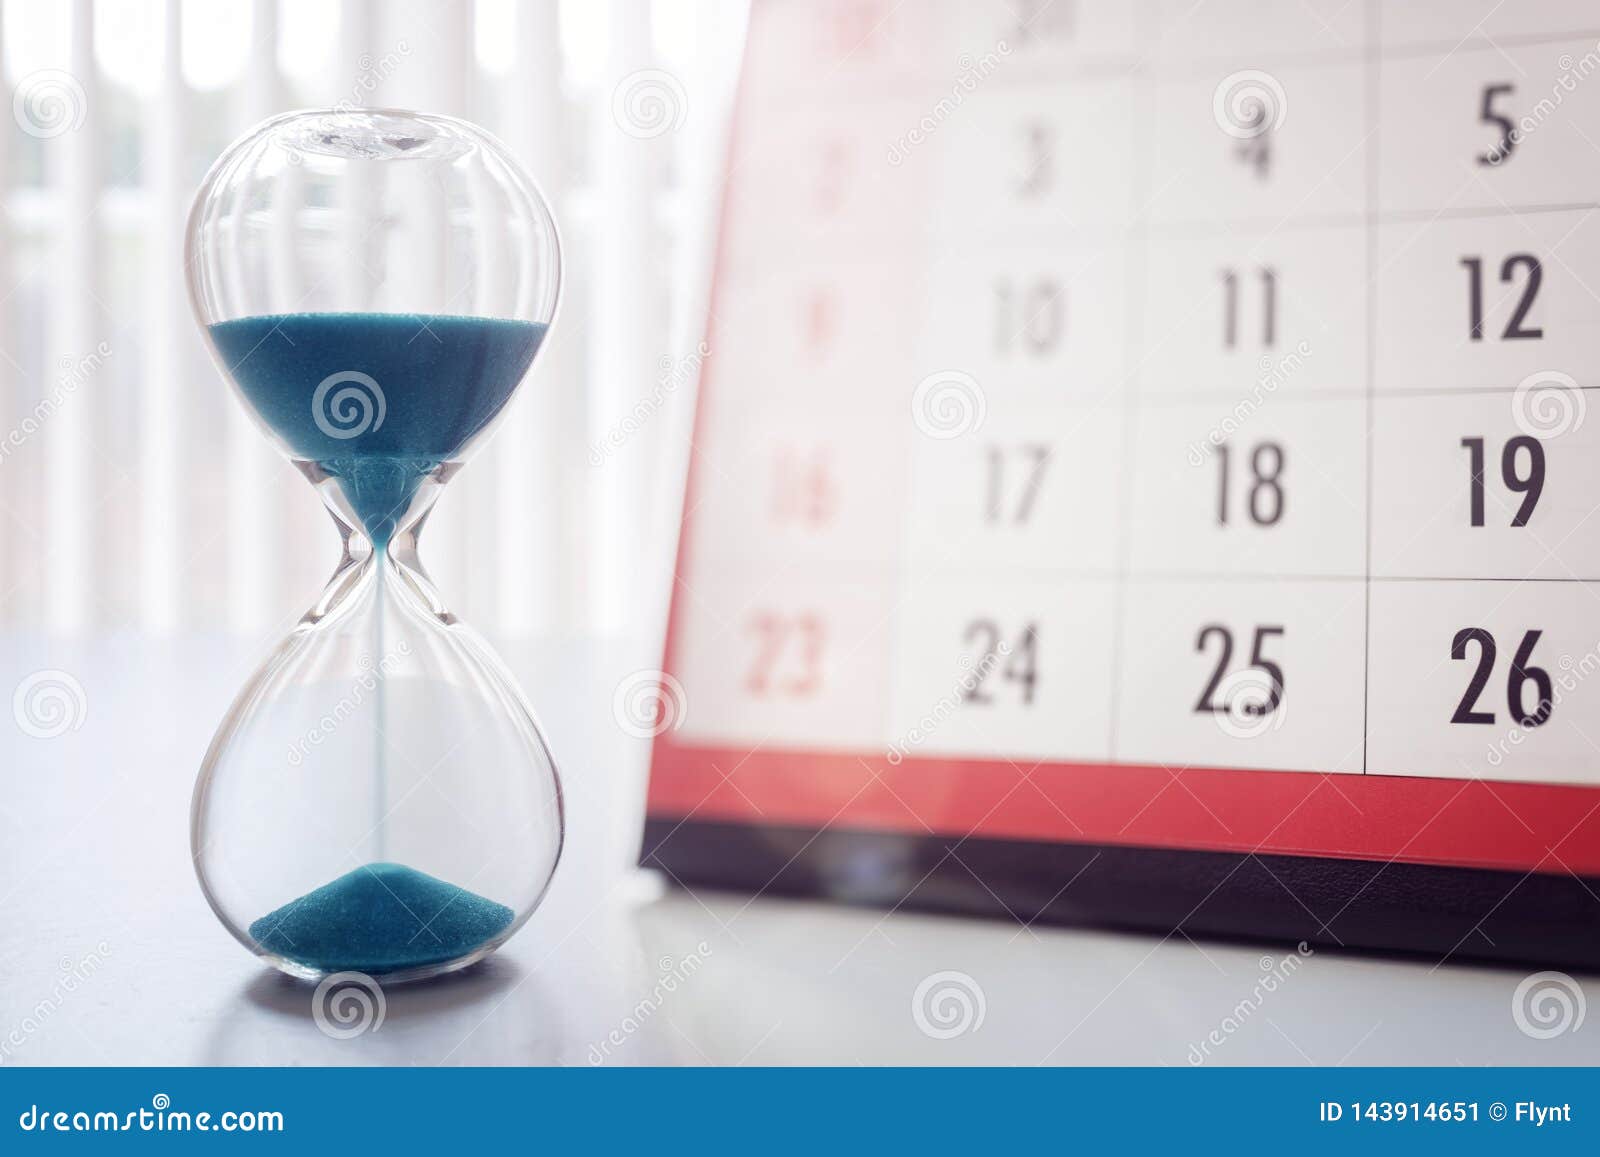 hour glass and calendar important appointment date, schedule and deadline